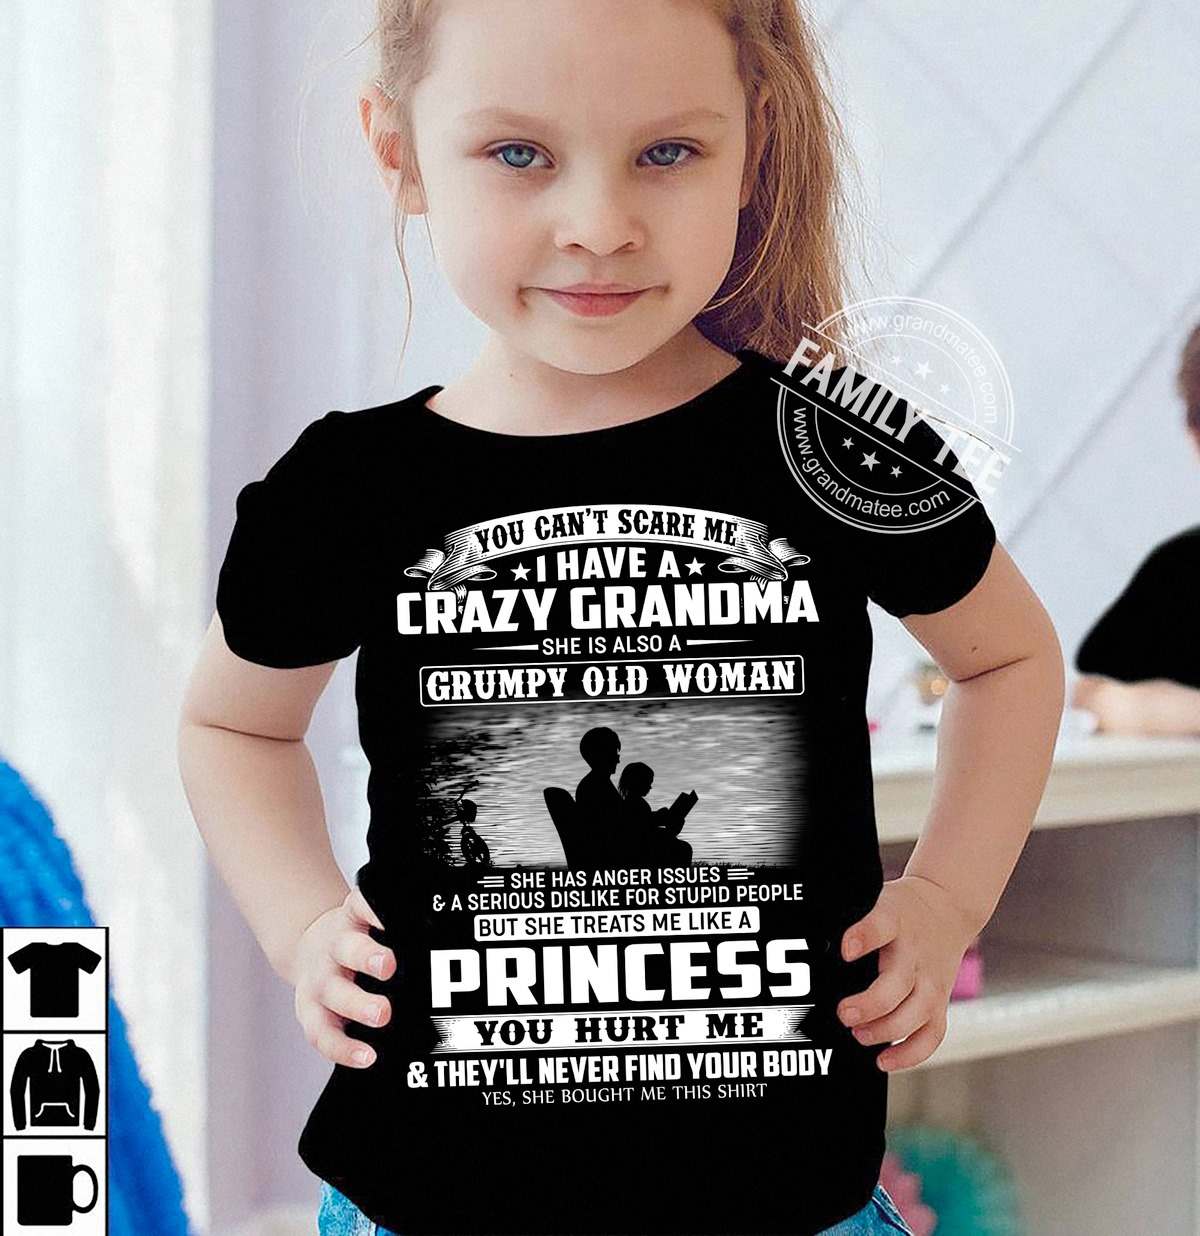 You can't scare me i have crazy grandma she is also a grumpy old woman but he treats me like a princess you hurt me